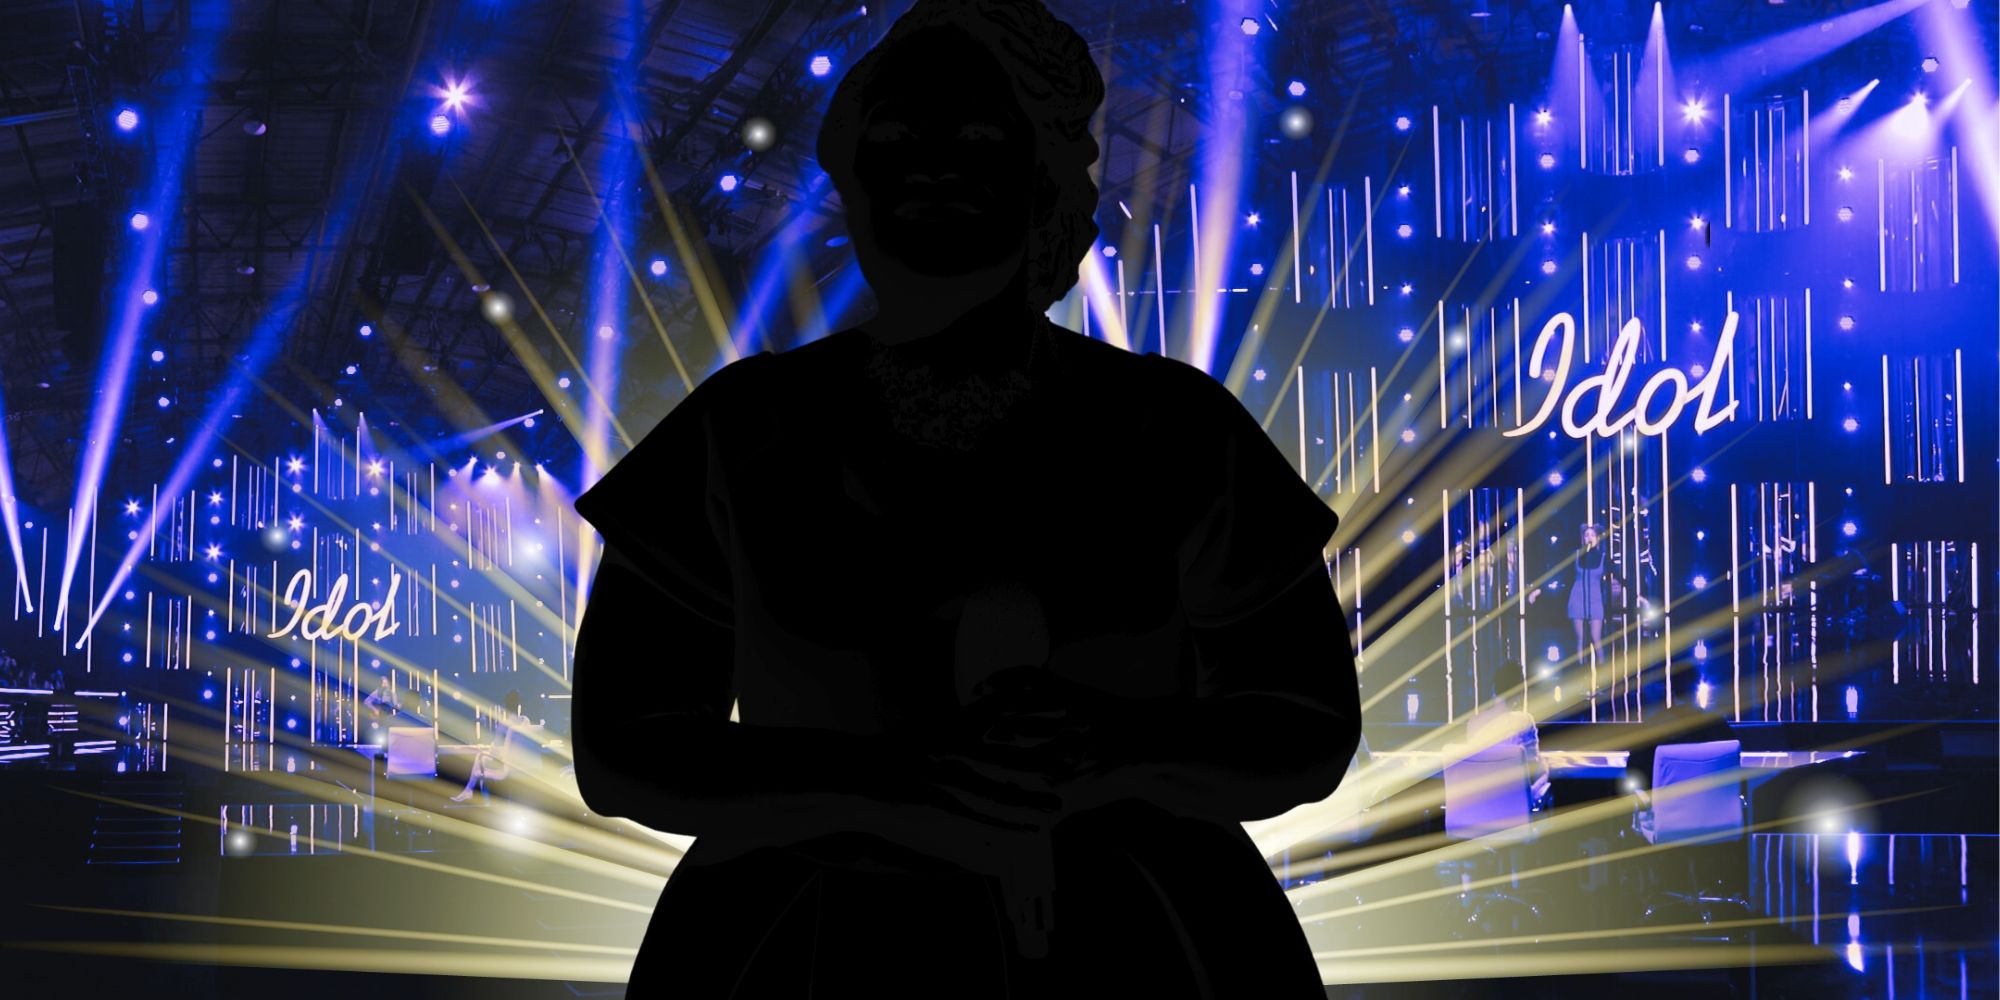 Silhouette of Mandisa, in front of American Idol stage